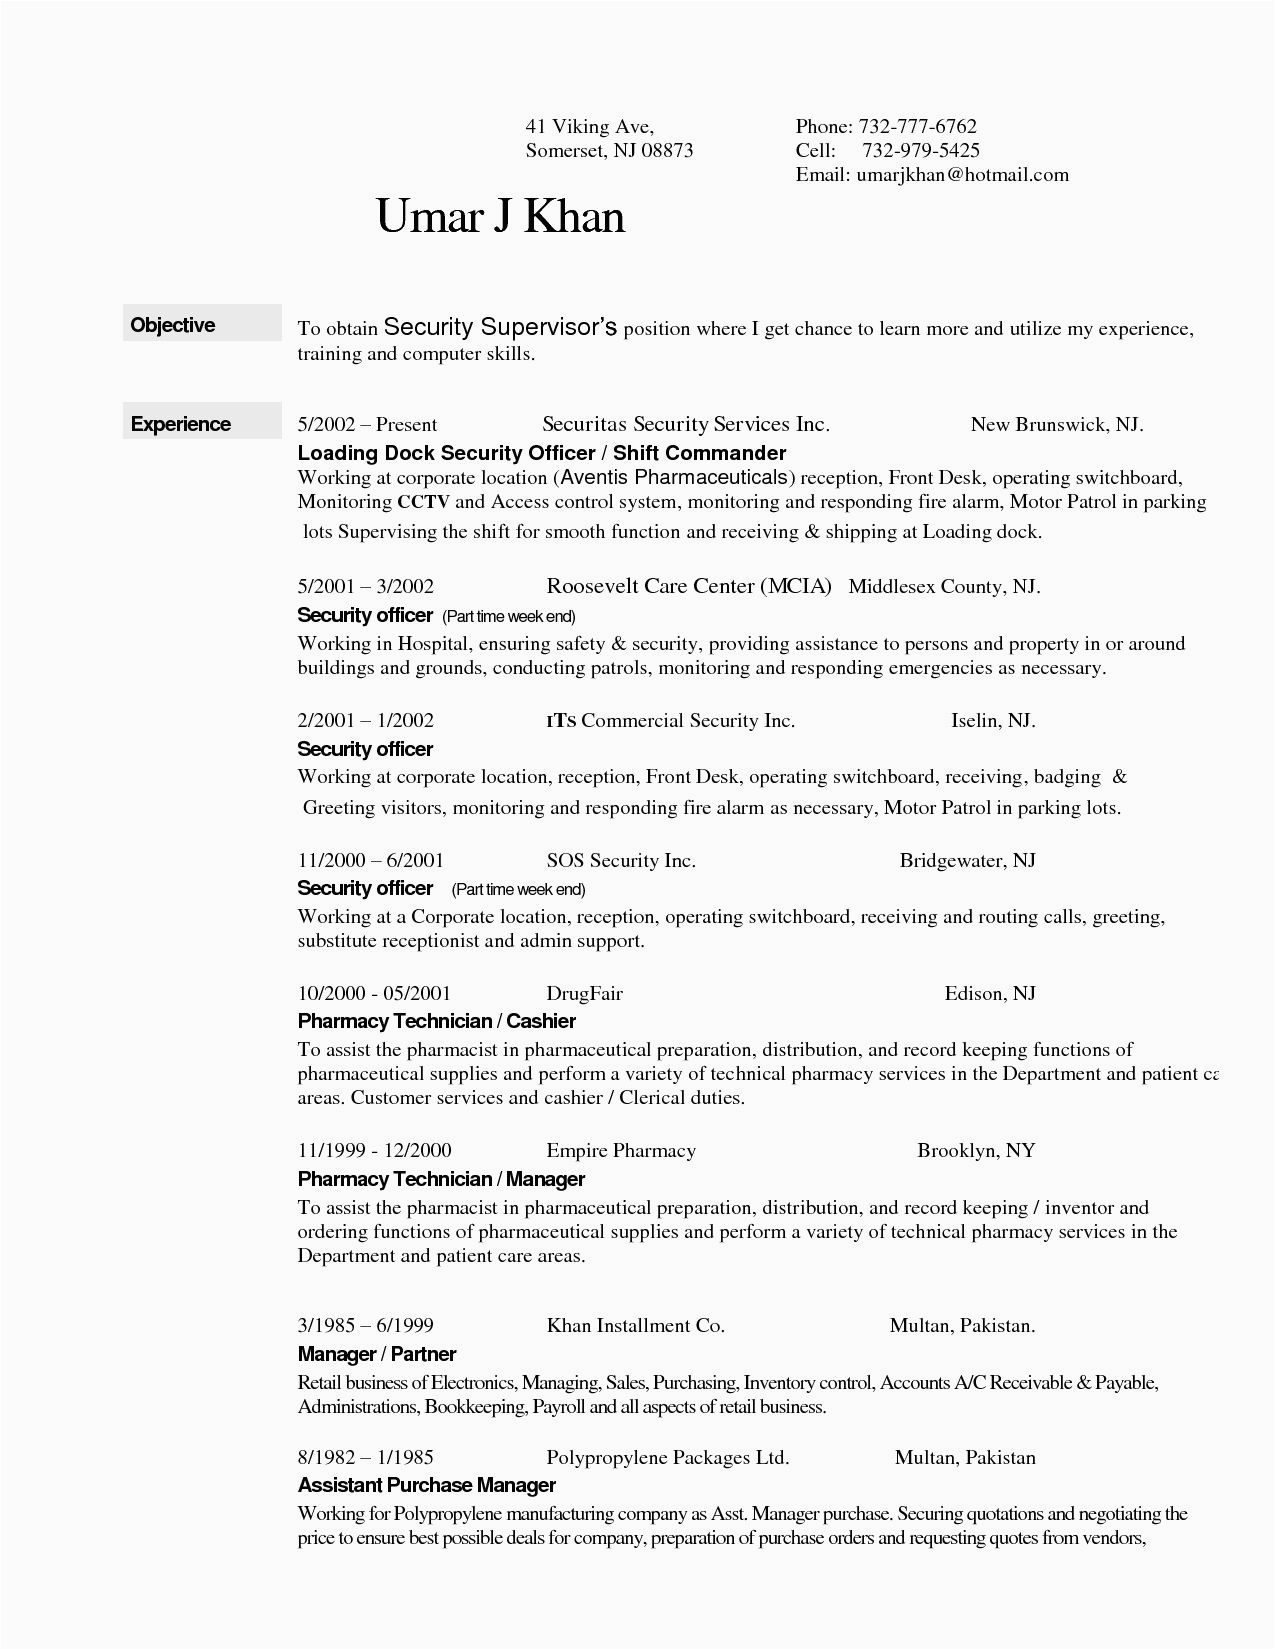 Sample Resume Objective for Summer Job Entry Level Security Analyst Resume Unique Pin by